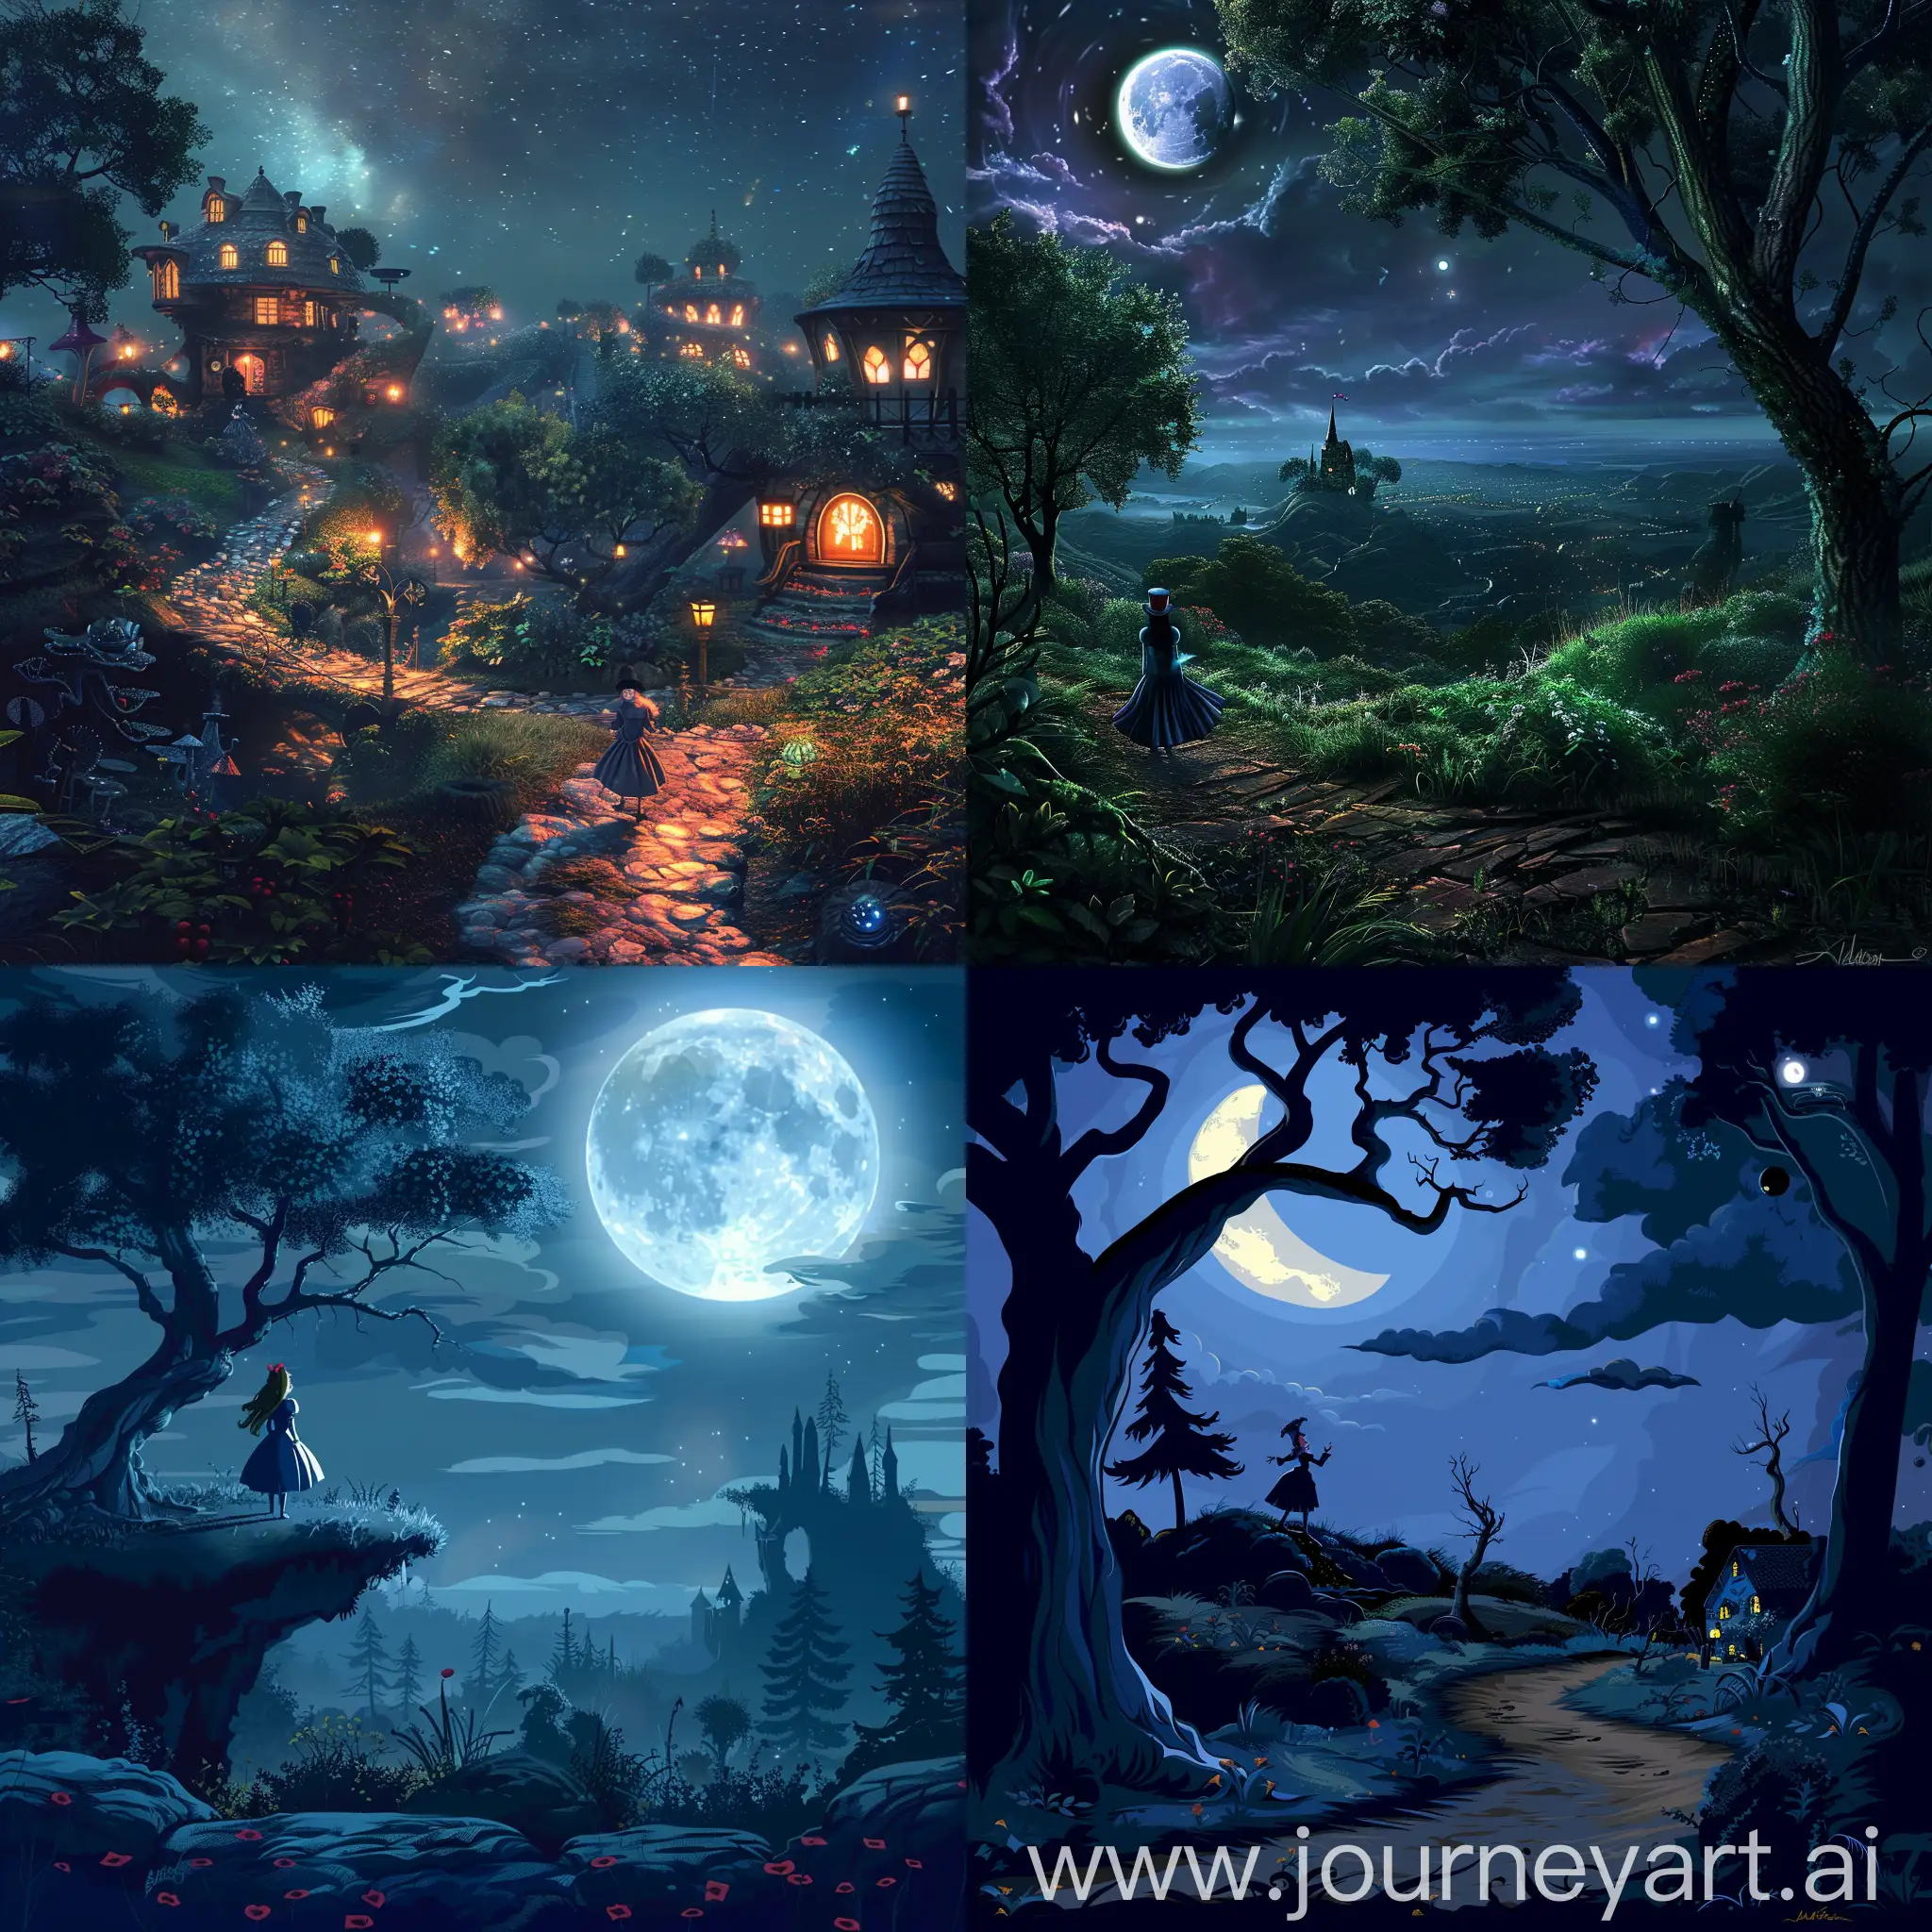 Enchanted-Nighttime-Landscape-Inspired-by-Alice-in-Wonderland